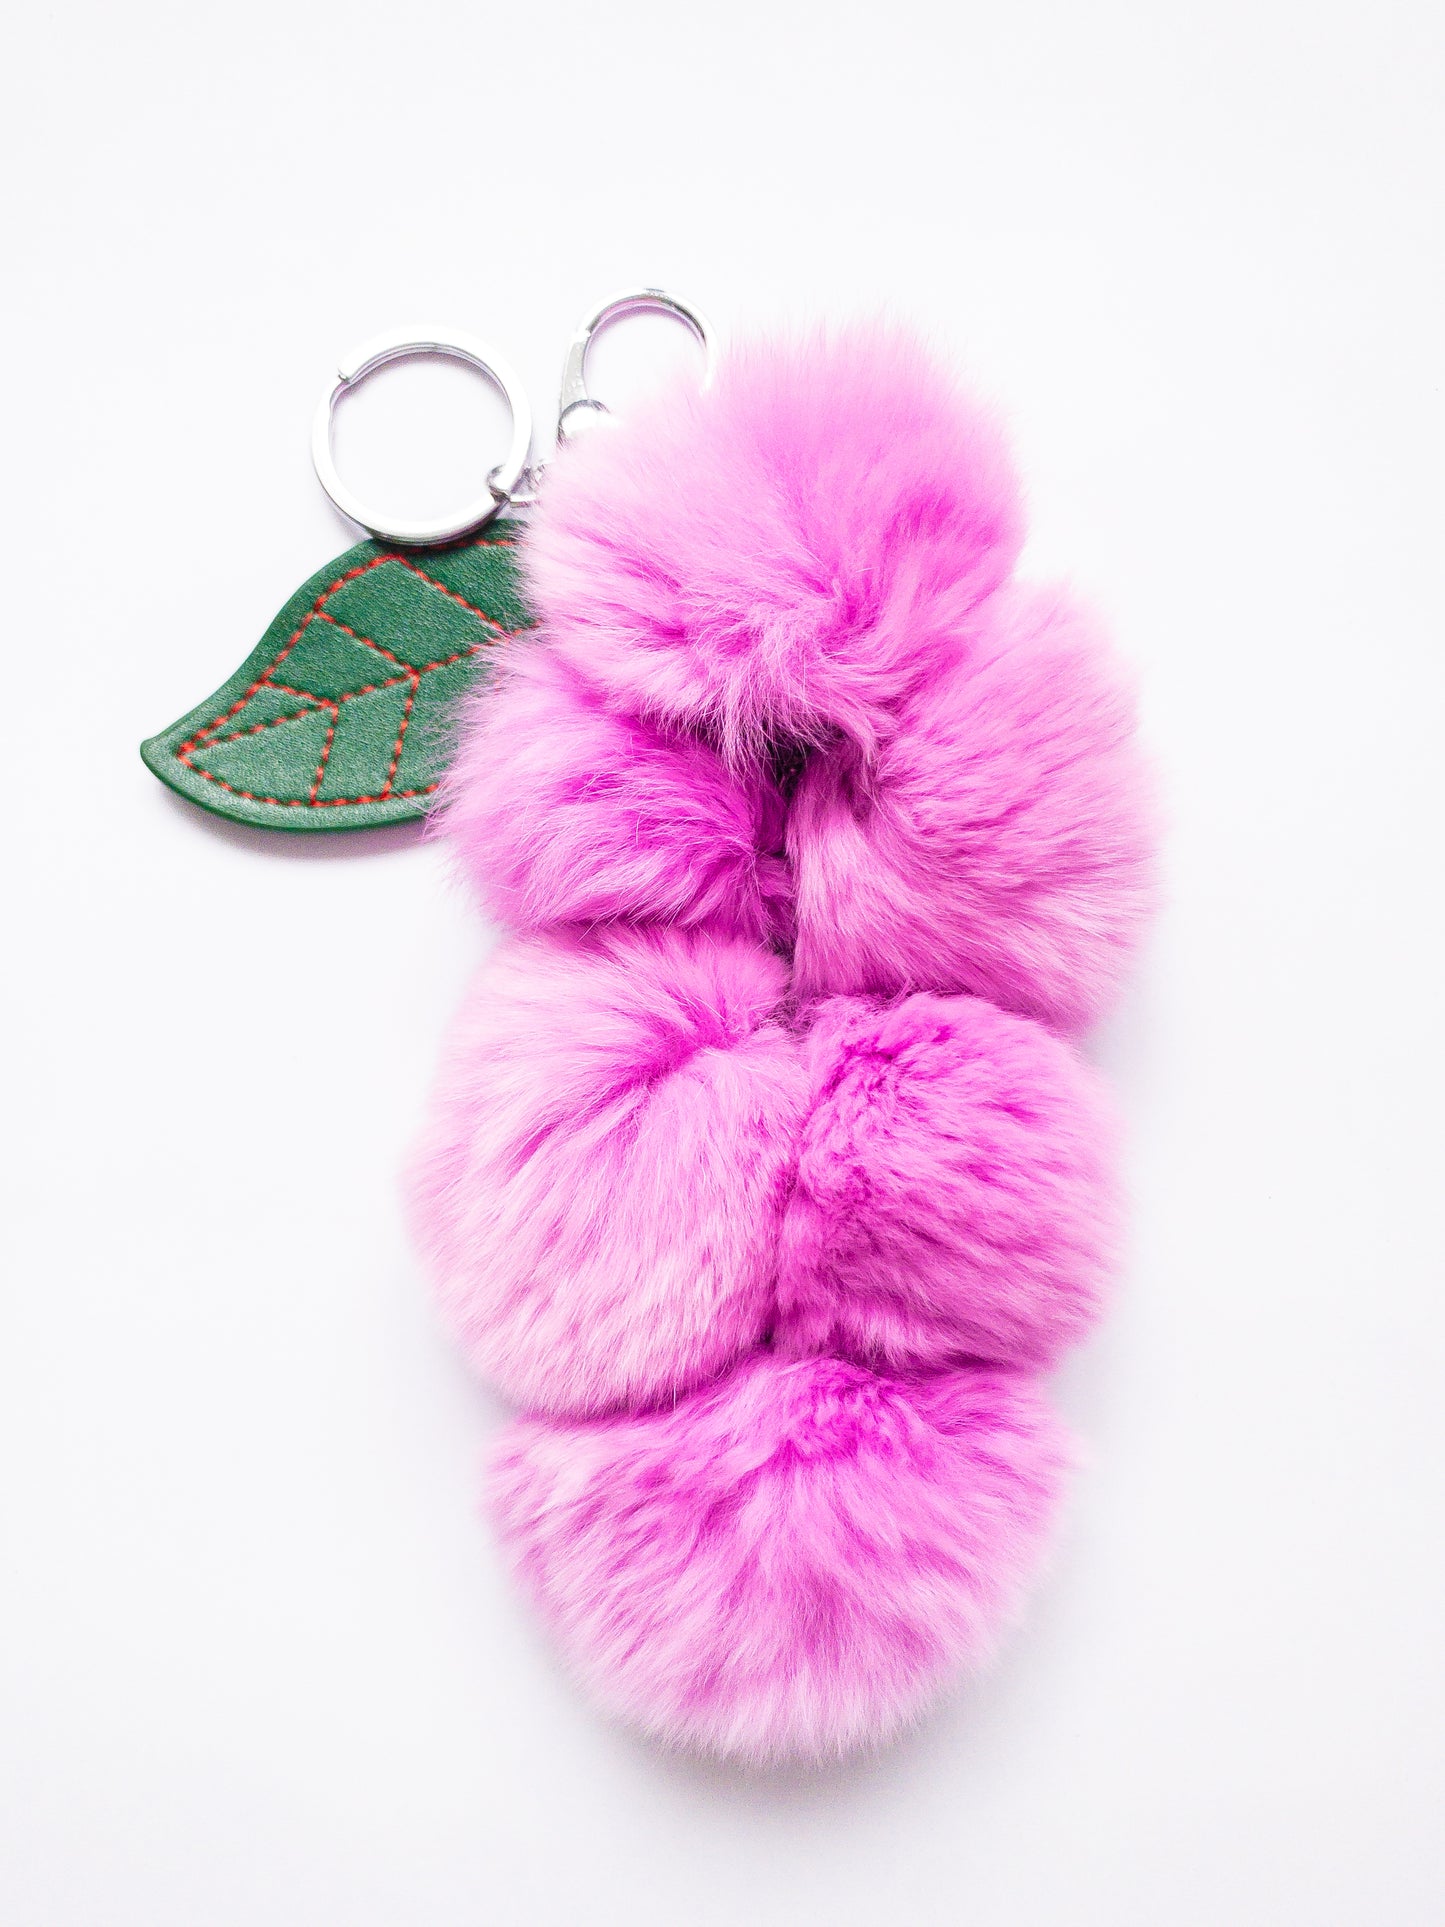 Add a pop of fun to your keys with this super soft grape keychain! The faux rabbit fur is addictively soft and strung together on a chain with a vegan leather grape petal. Clip onto your purse or backpack or attach your keys, making them easy to find at the bottom of your bag.